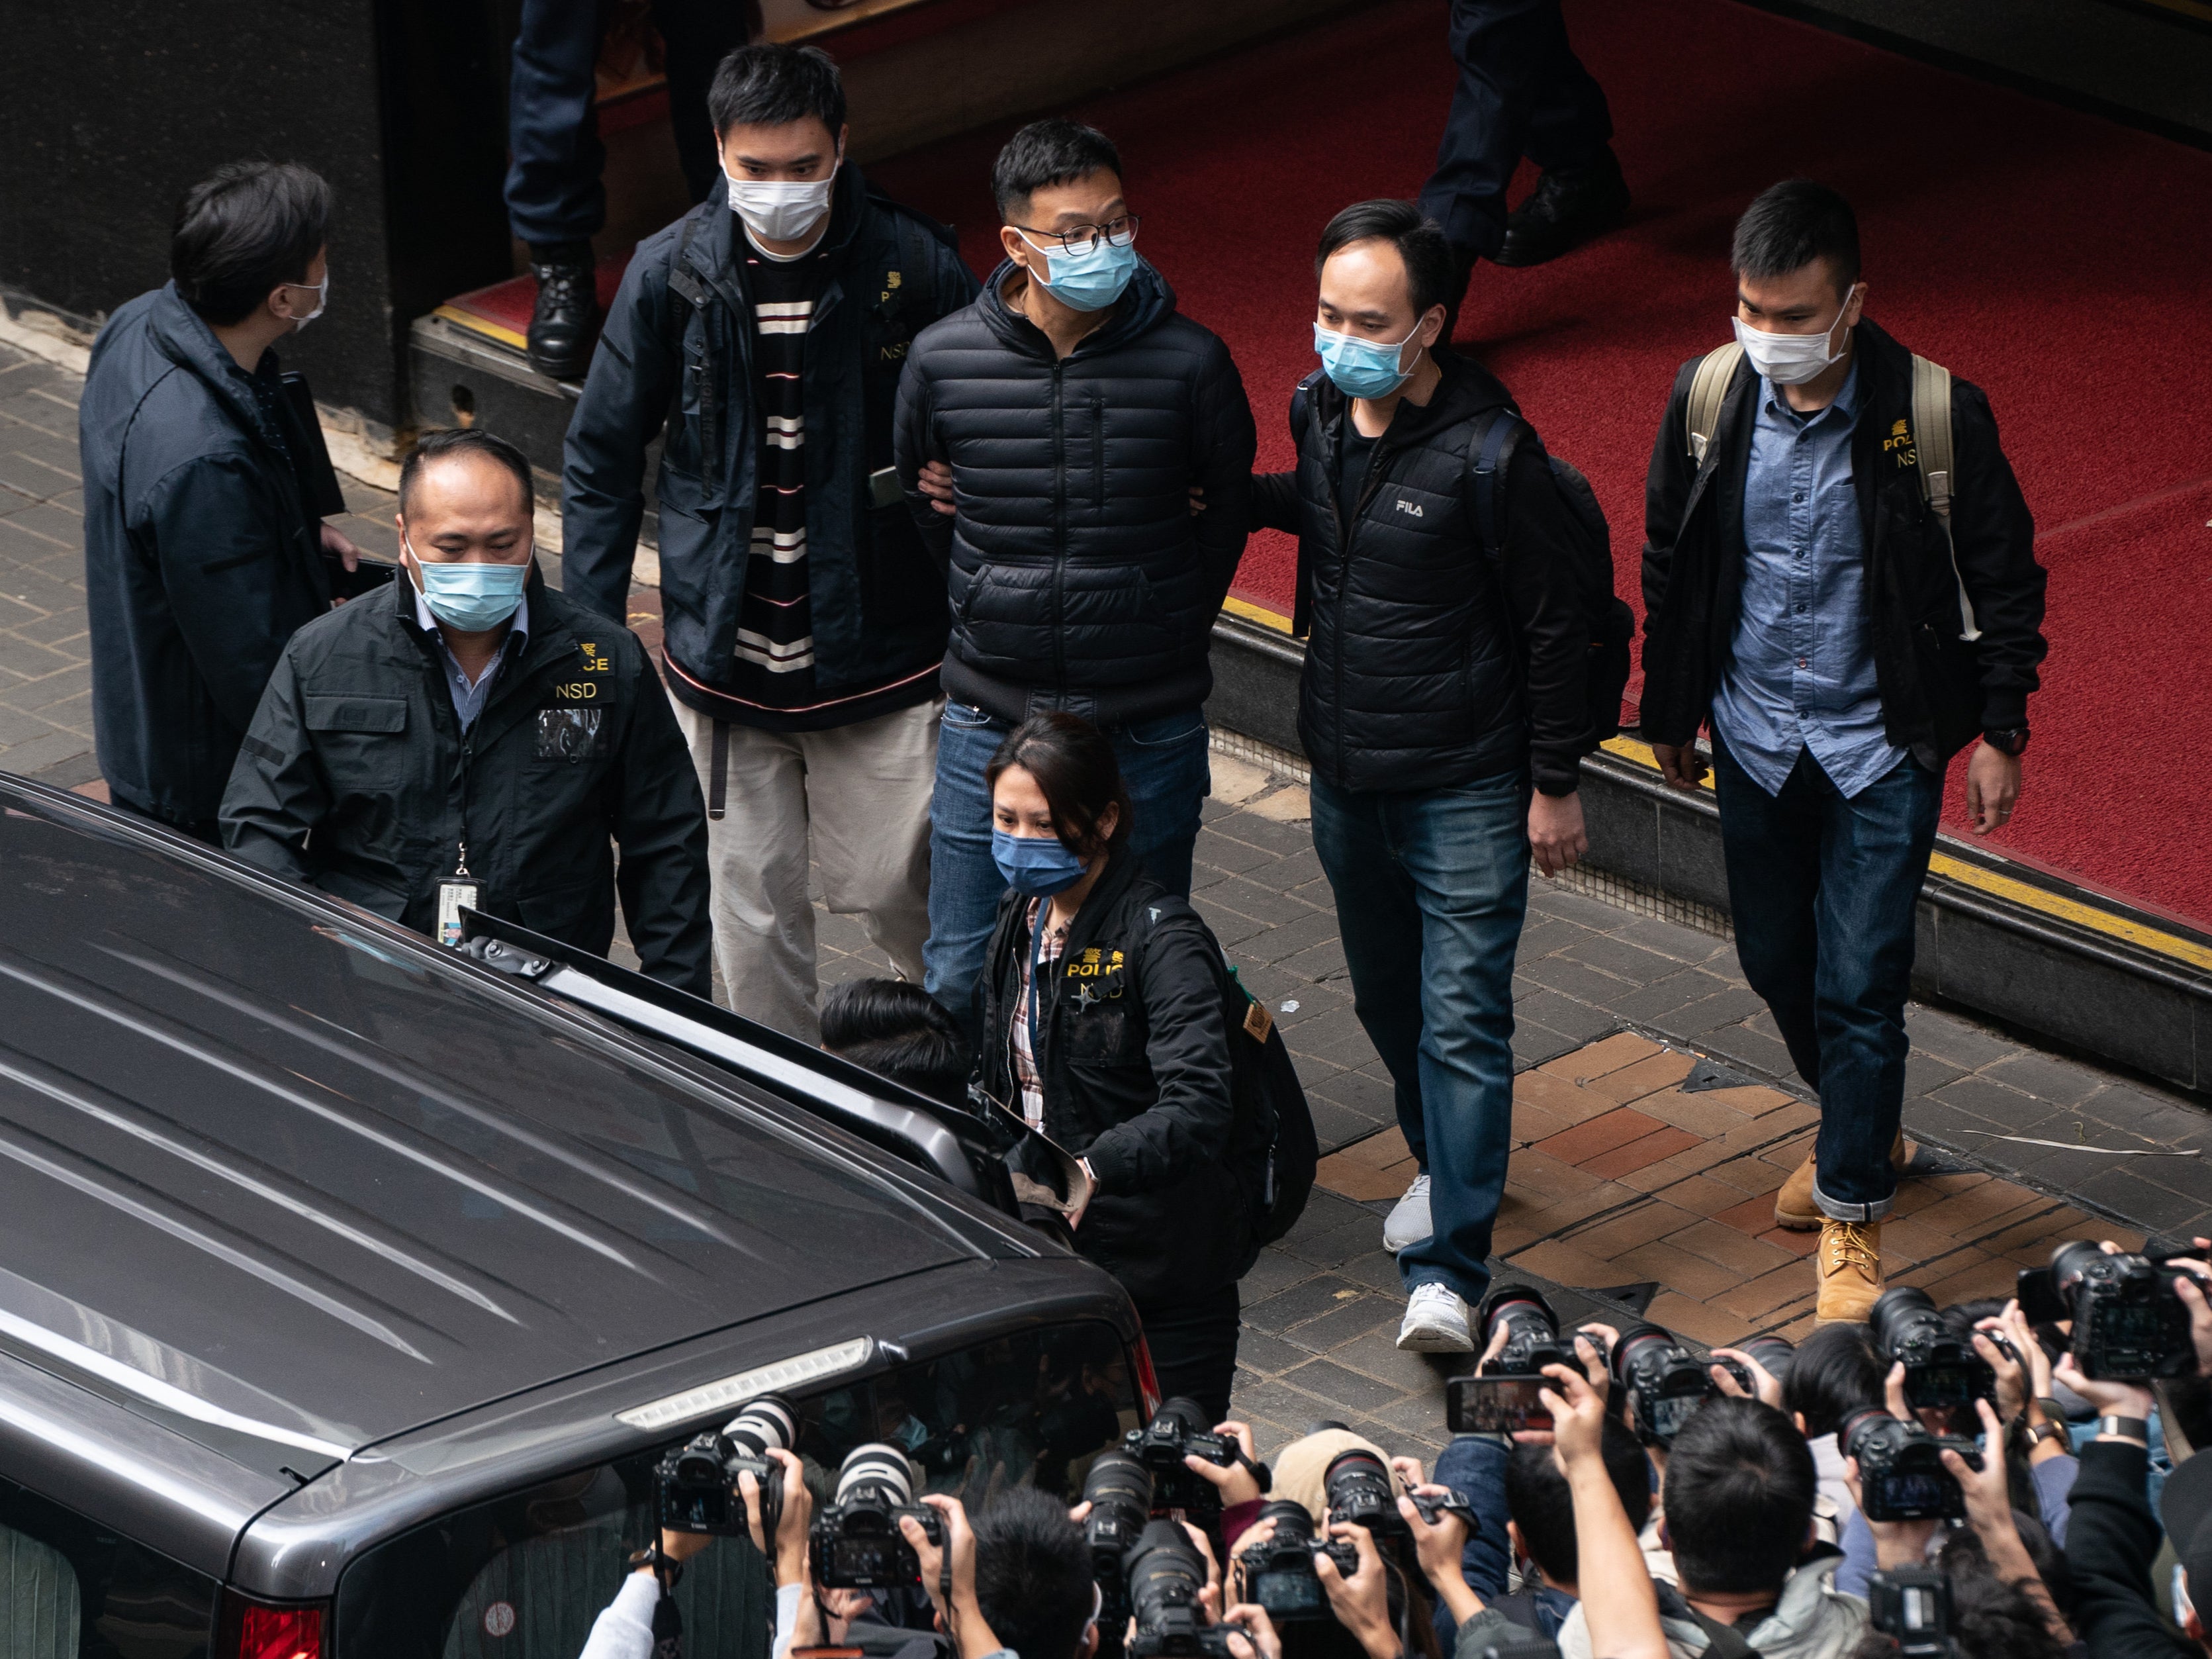 Stand News Editor-in-Chief Patrick Lam is brought to a vehicle after police searched premises